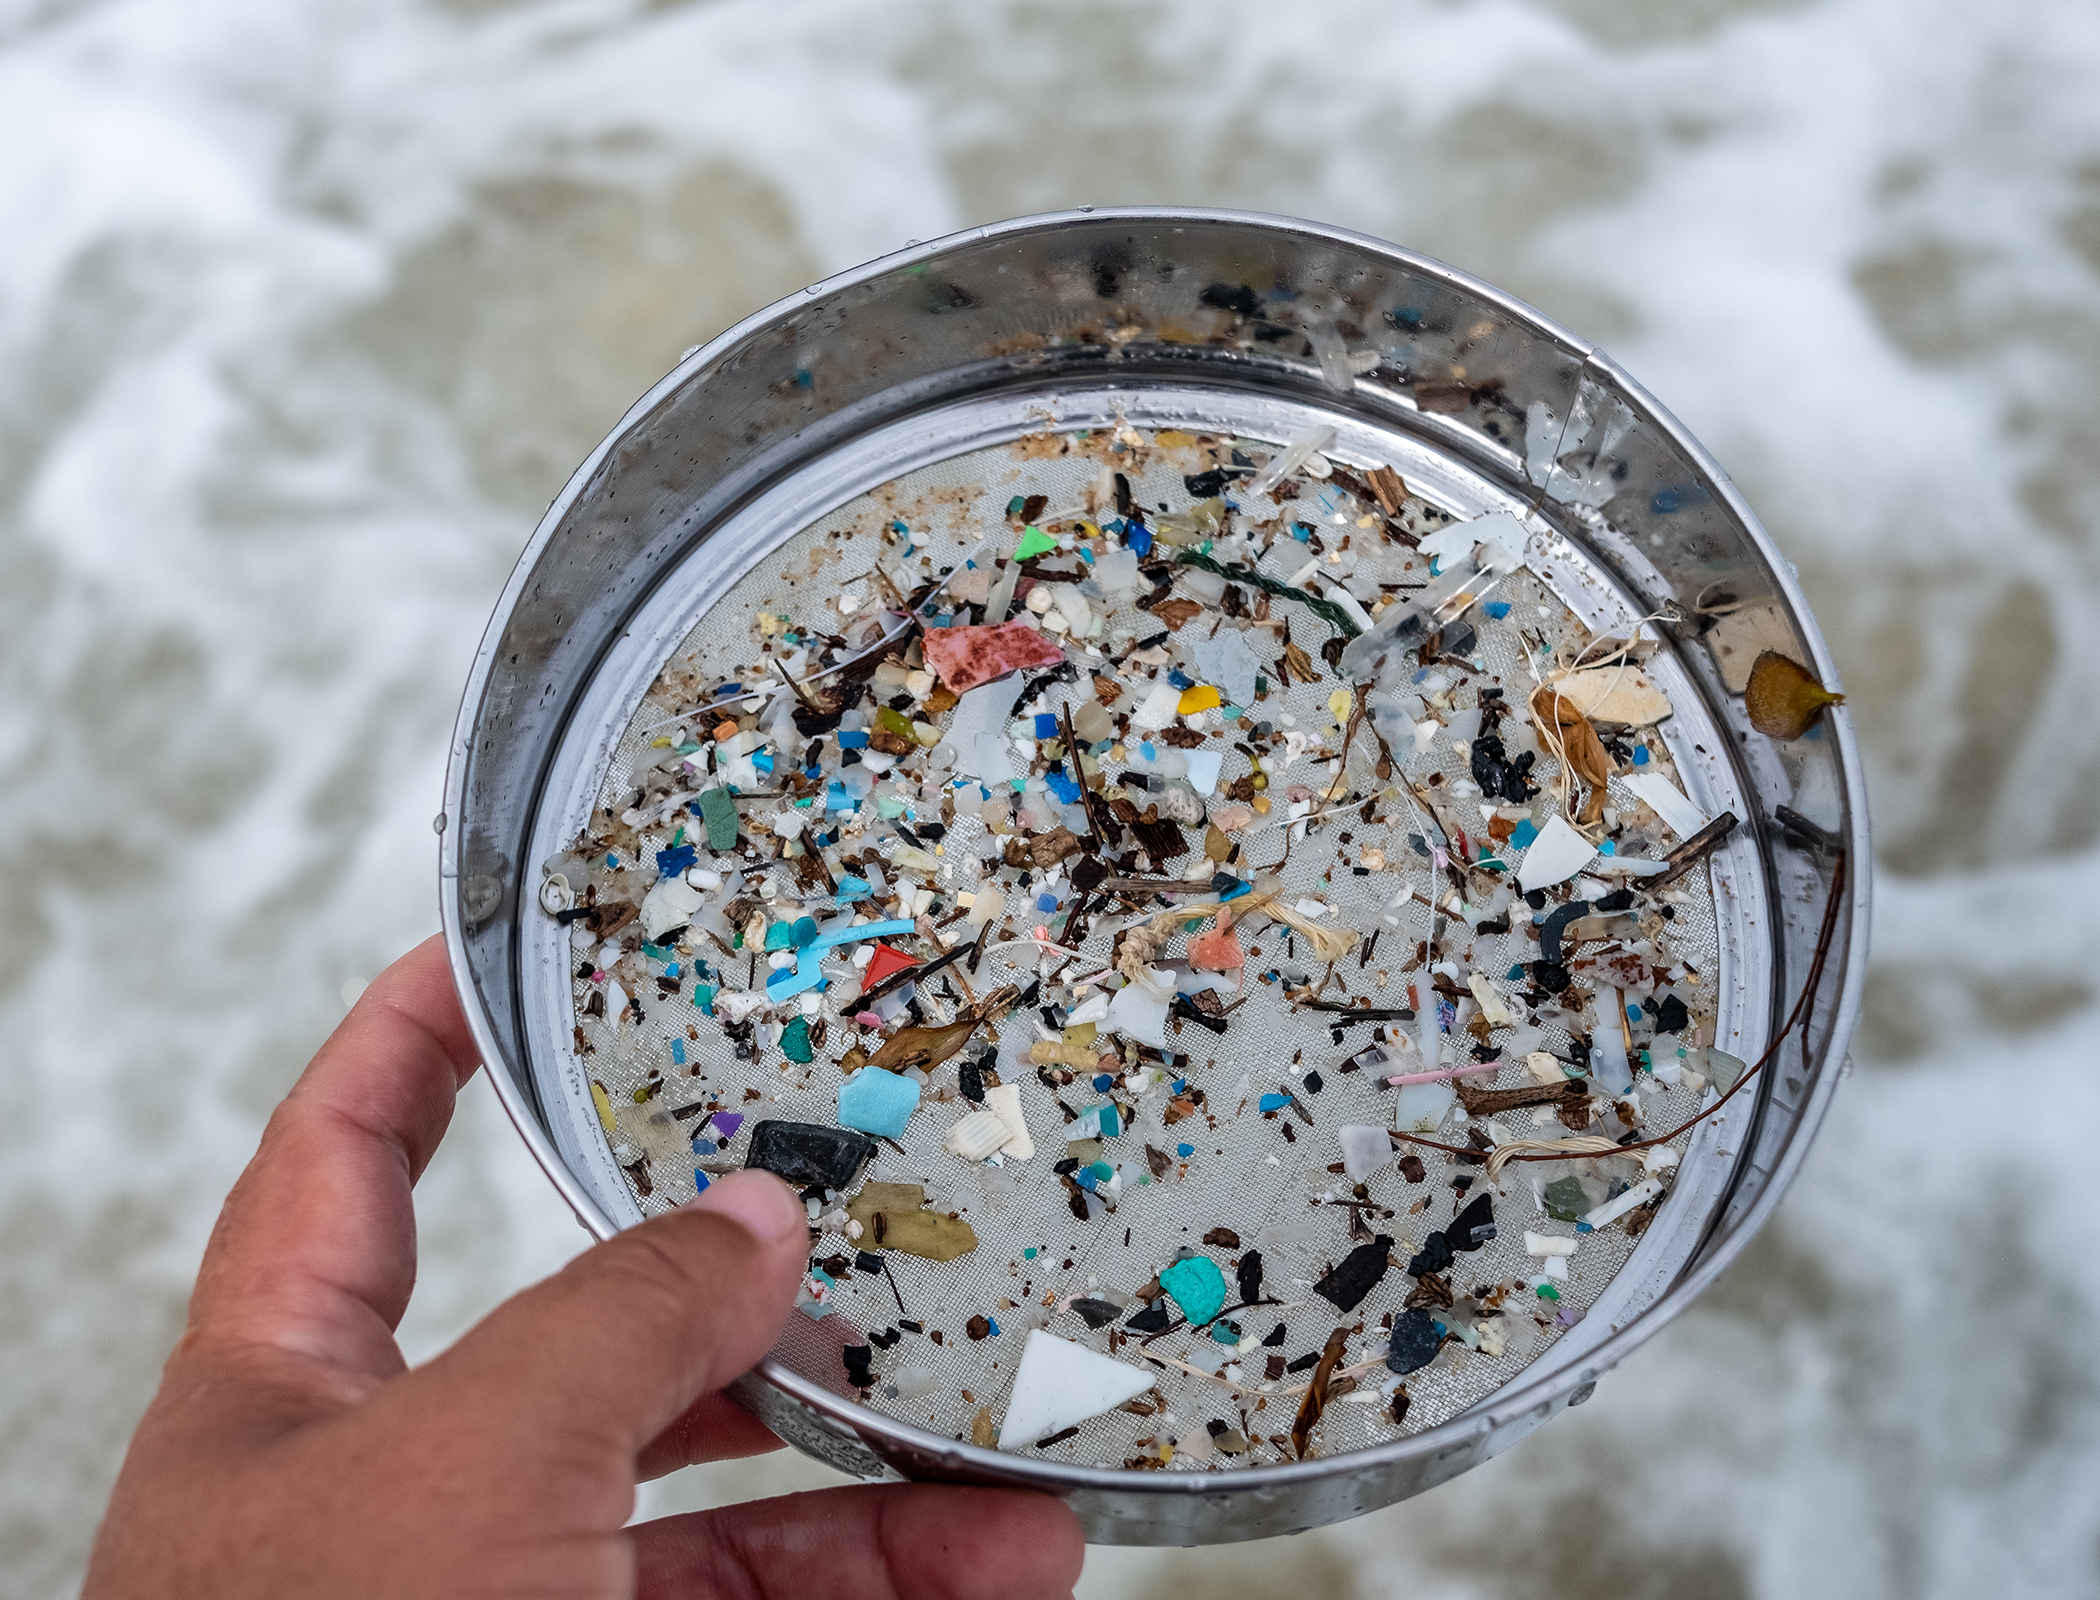 Simple wood dust filter removes 99 per cent of microplastics from water solution